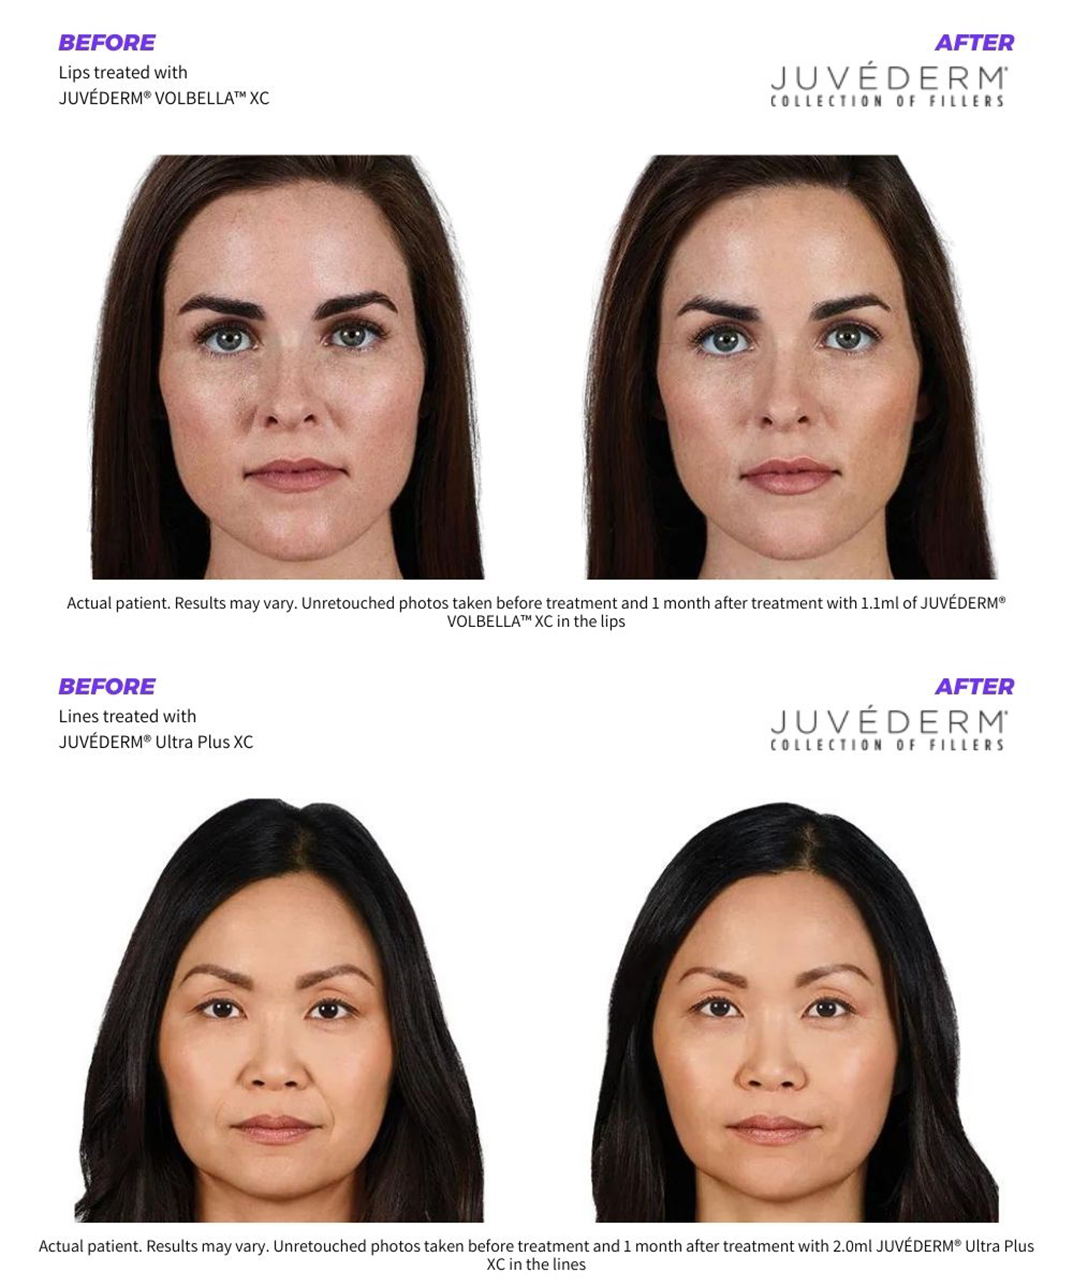 Before and after images of two women who have restored facial contours with Juvederm dermal fillers.